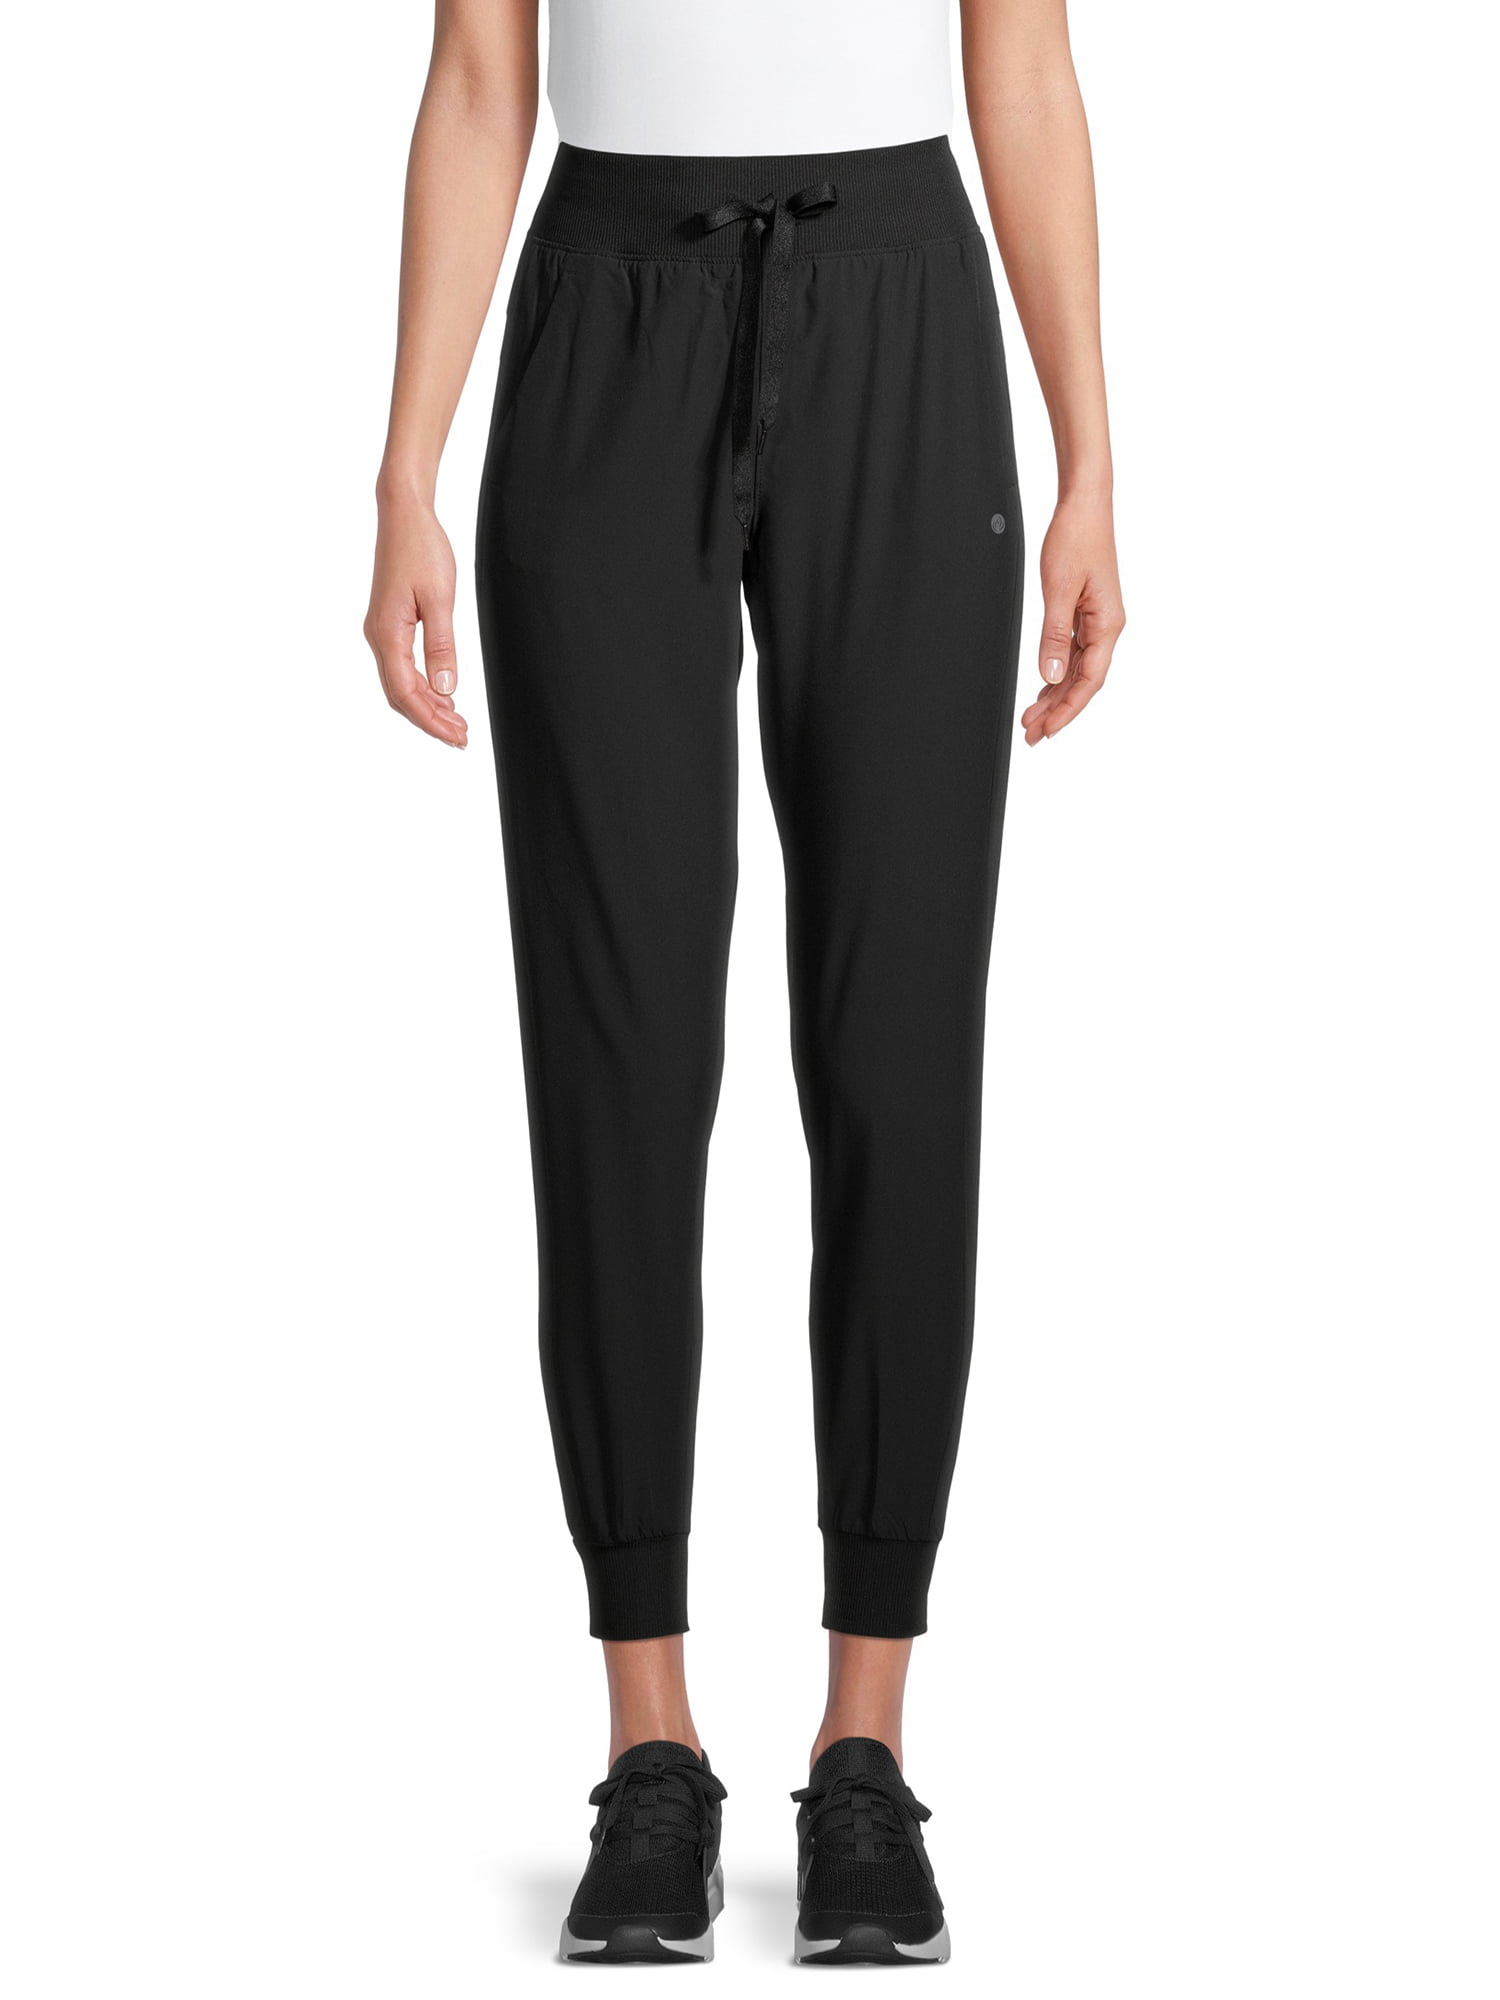 Apana Women's Athleisure Stretch Woven Joggers Pant with Ribbed Cuffs